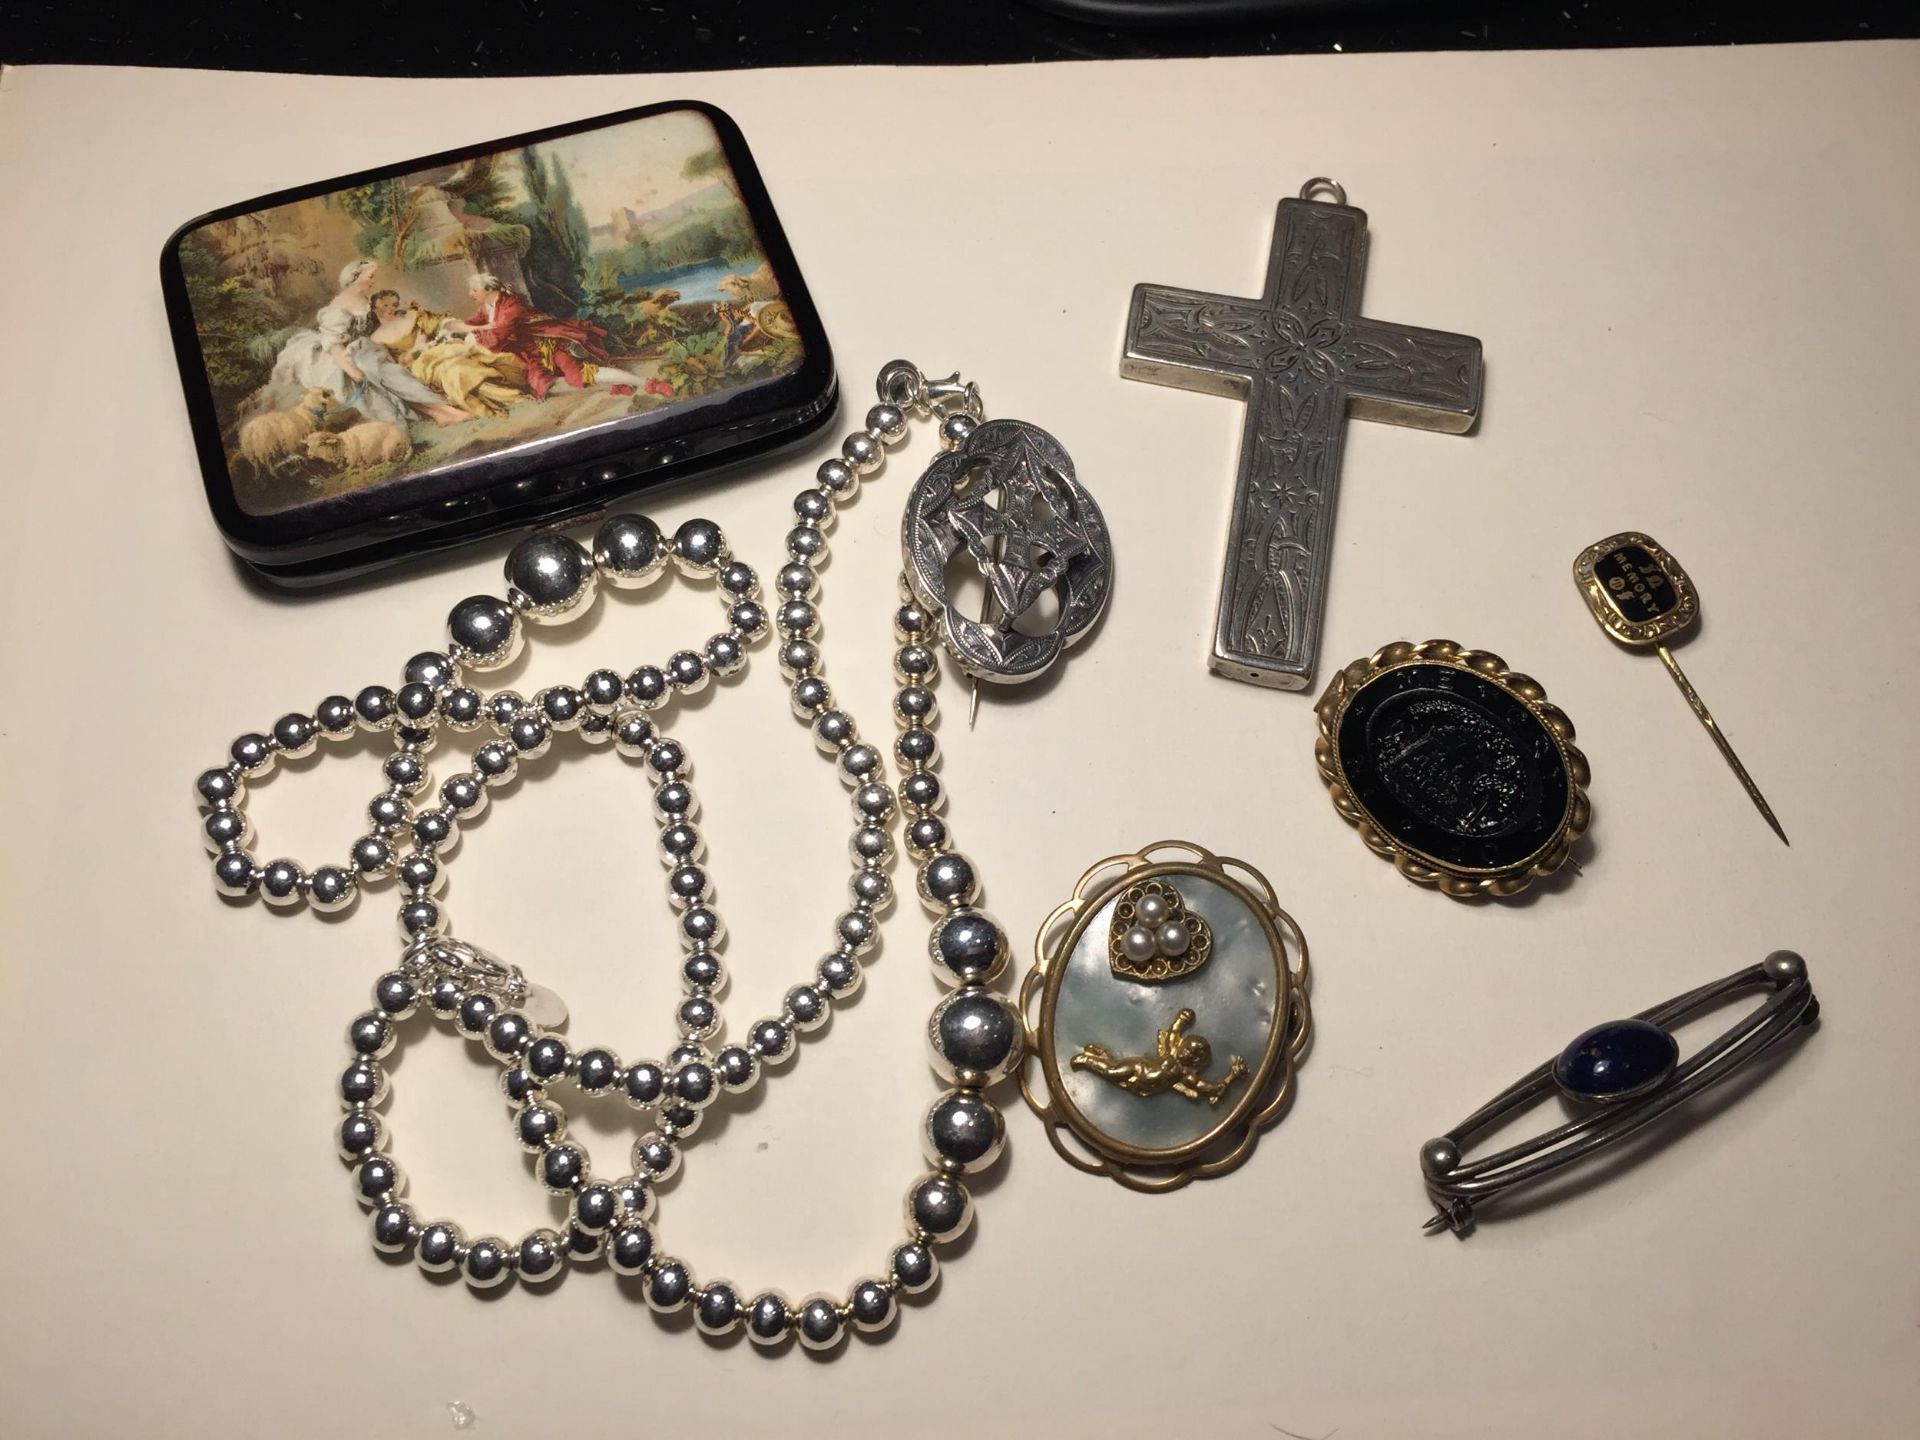 VARIOUS ITEMS TO INCLUDE AN ORNATE CHEROOT CASE, BROOCHES, PENDANTS ETC